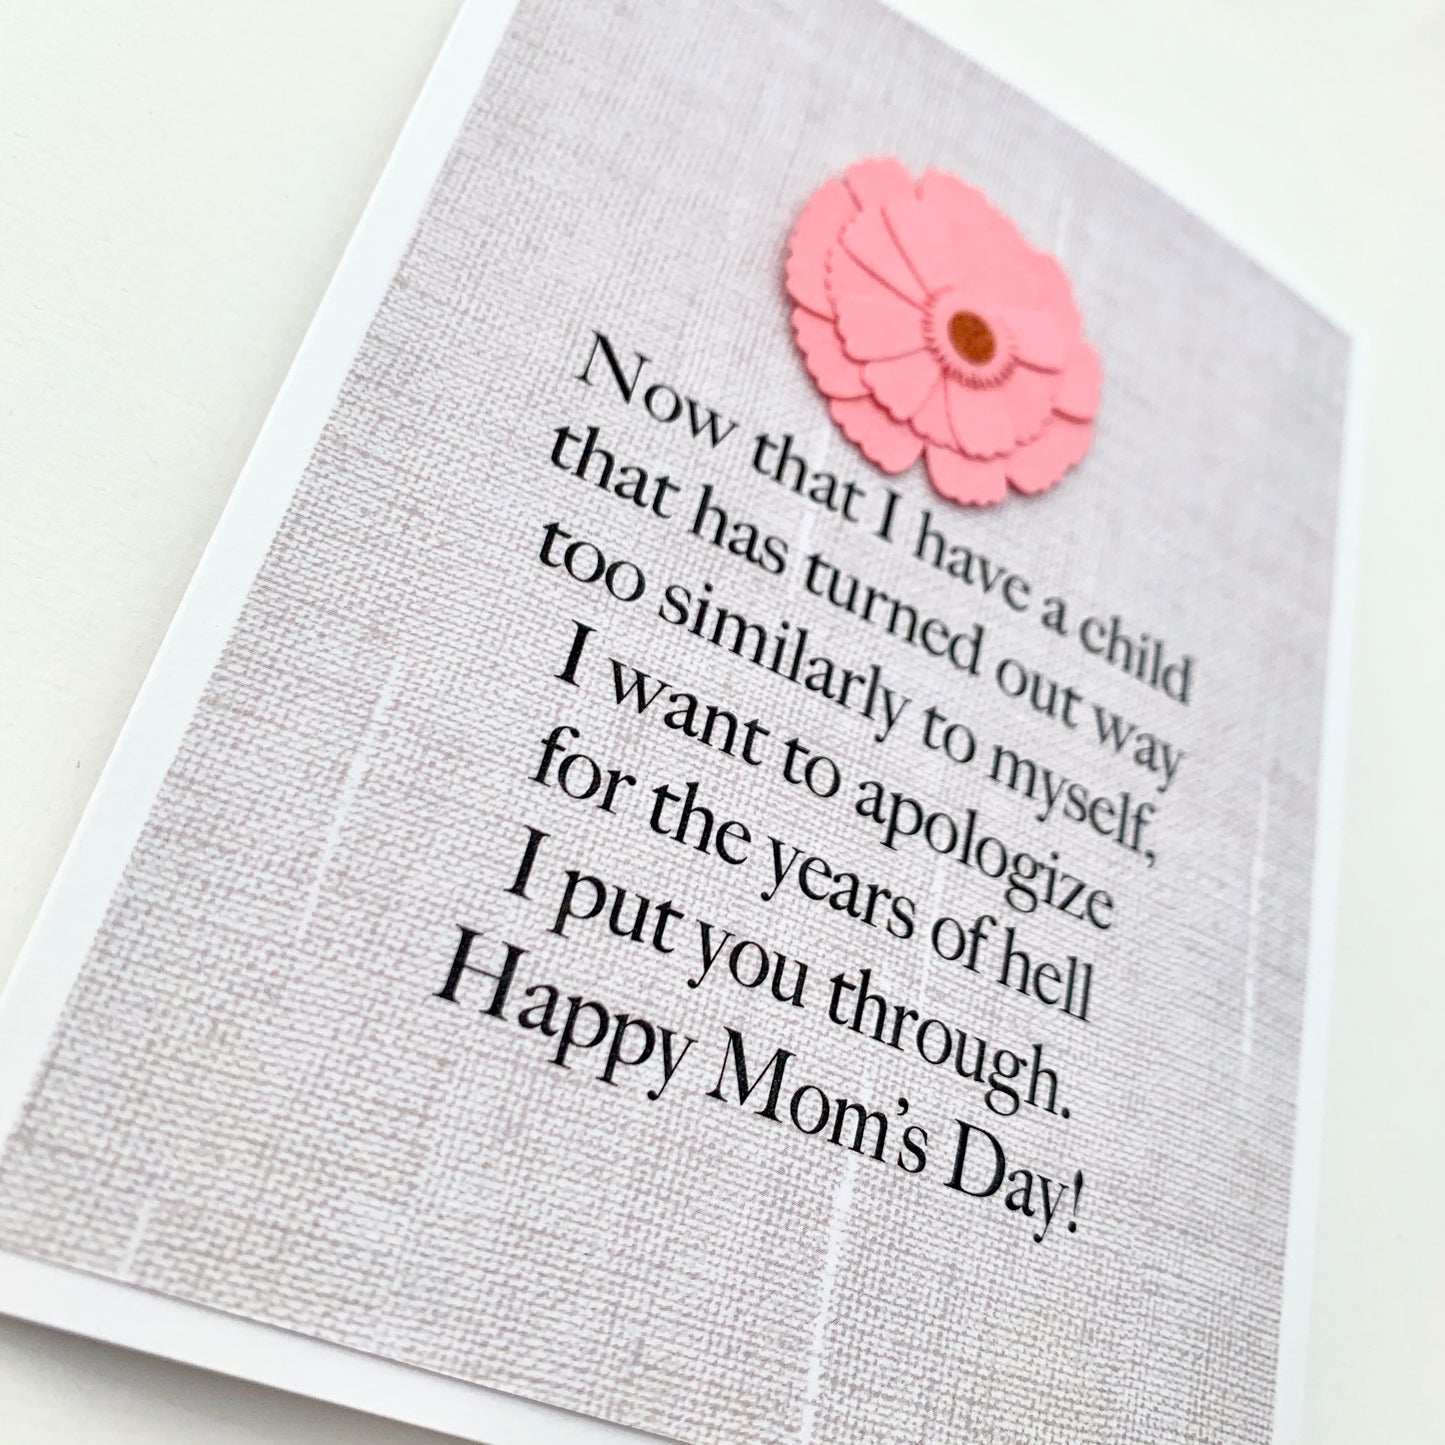 Mother’s Day Apologize for Years of Hell card